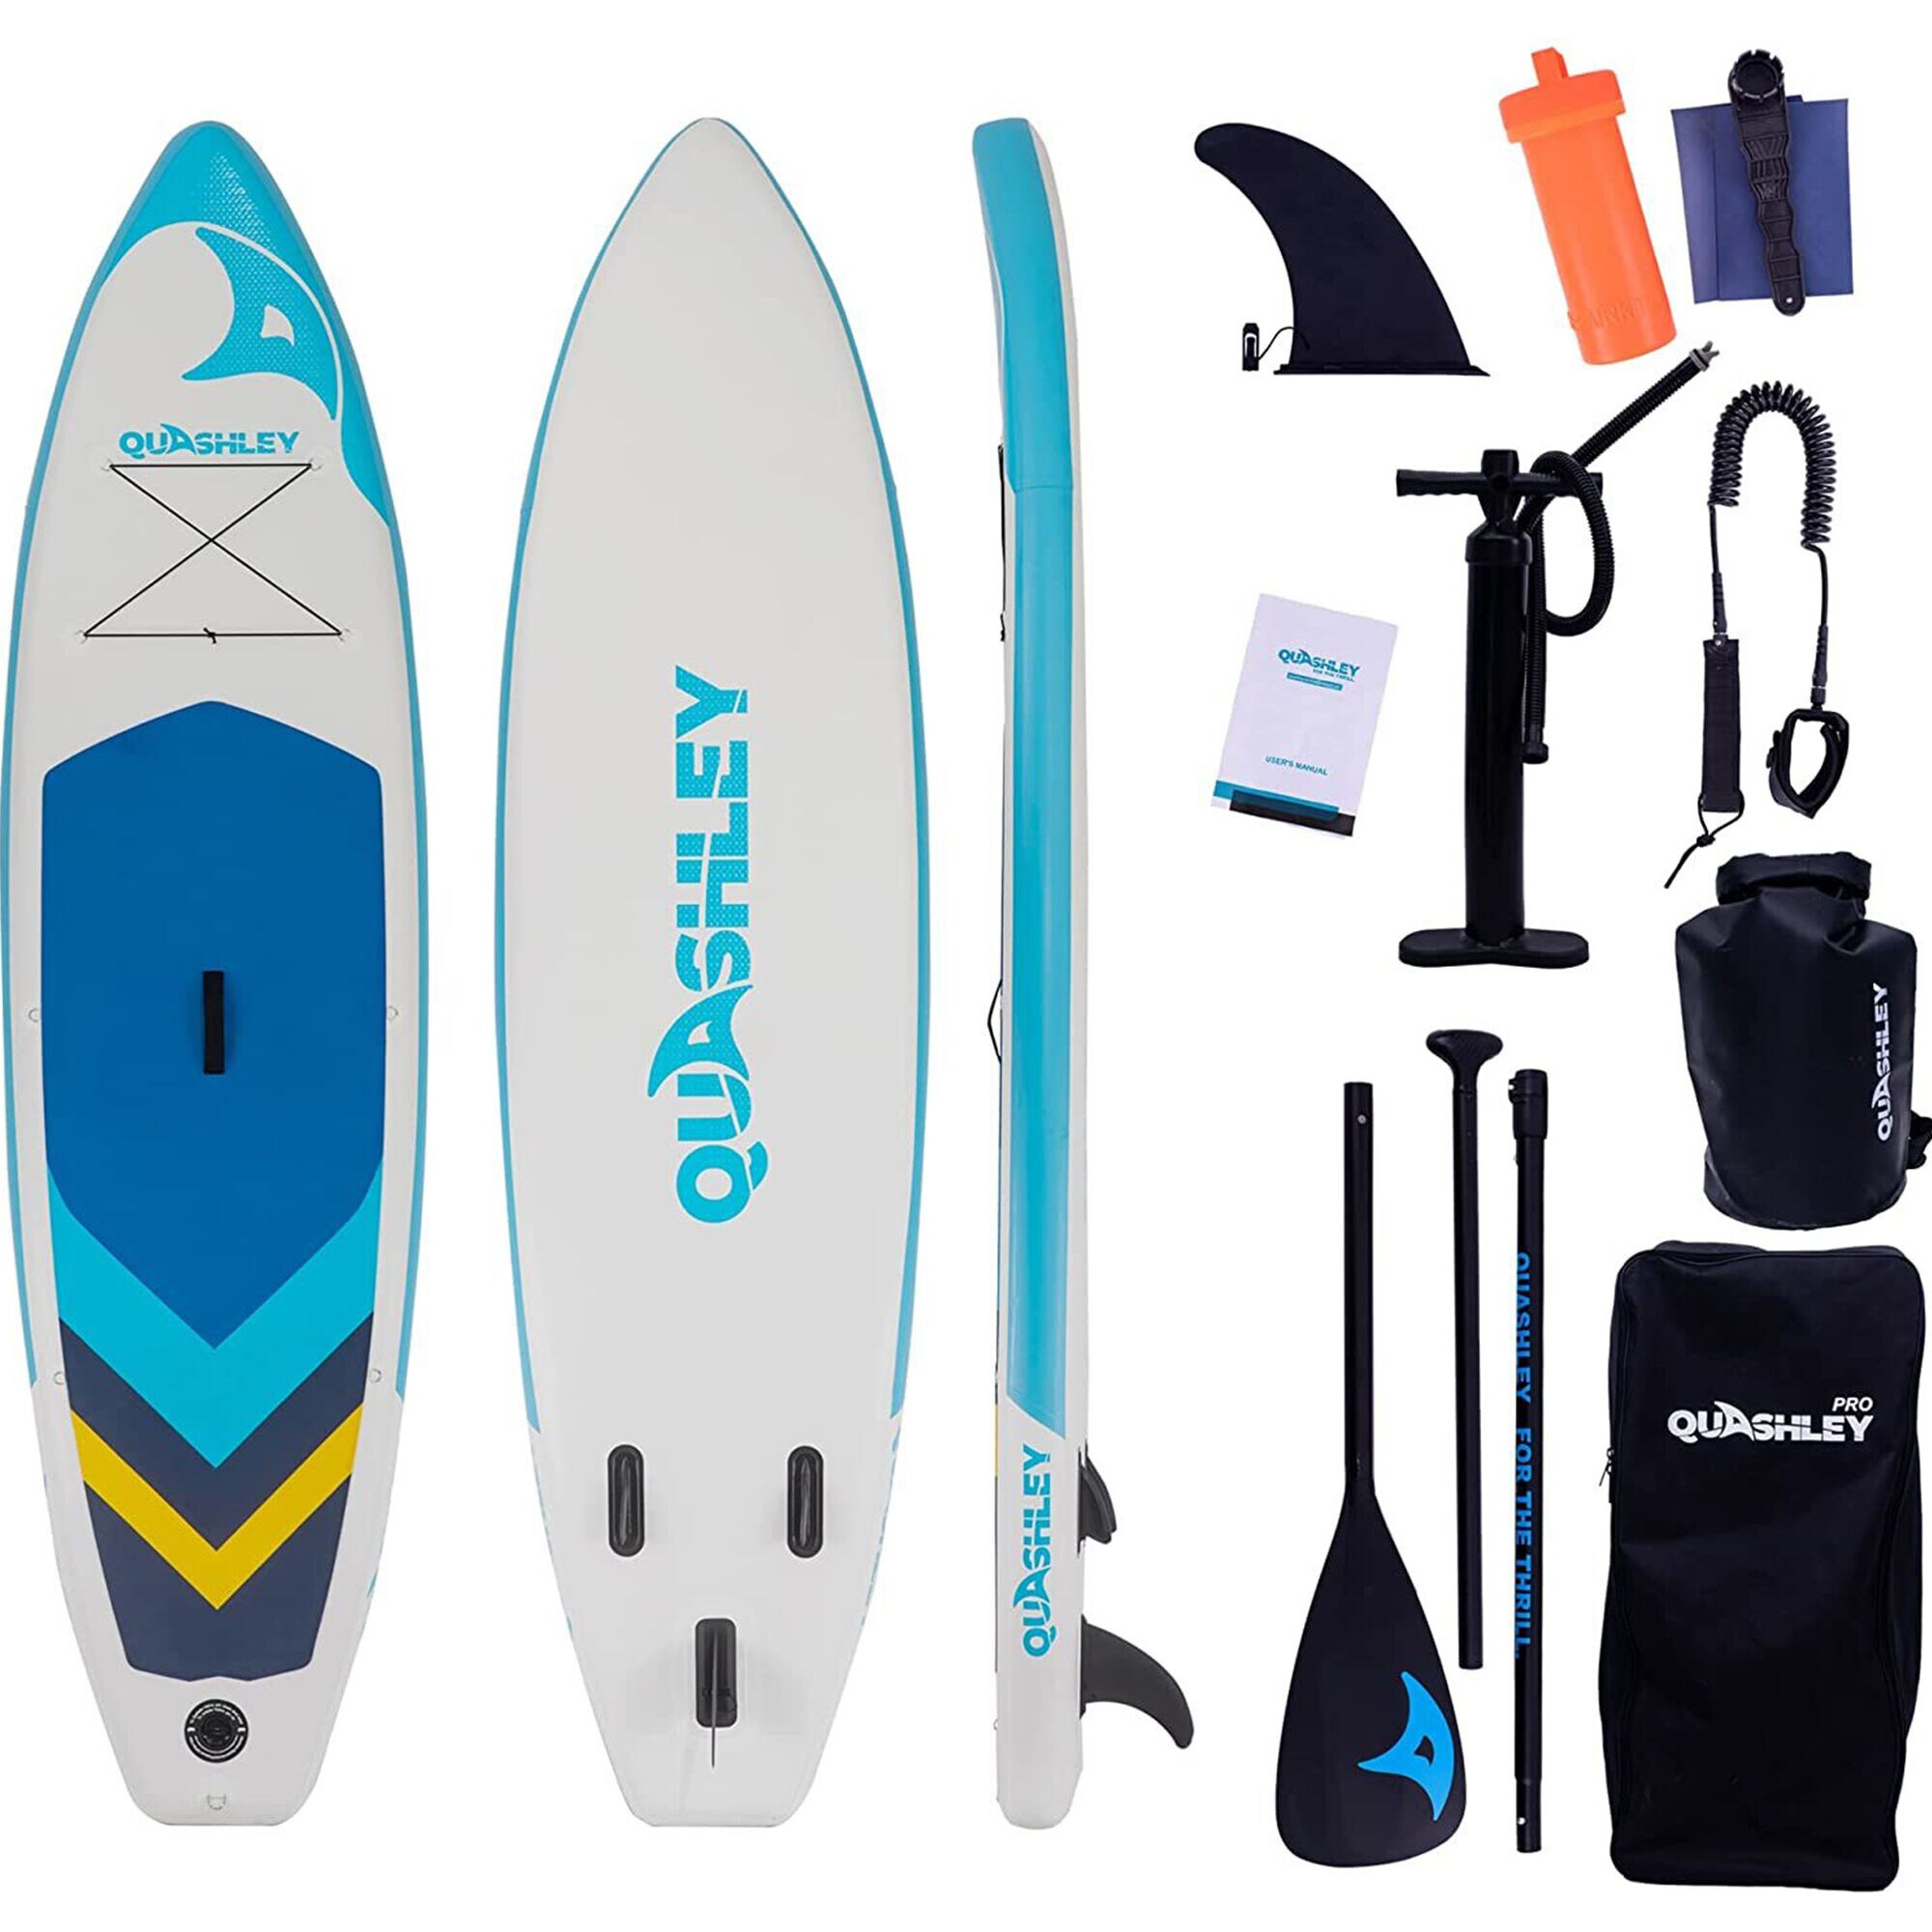 4 Top Rated Stand Up Paddle Boards at Lowes.com